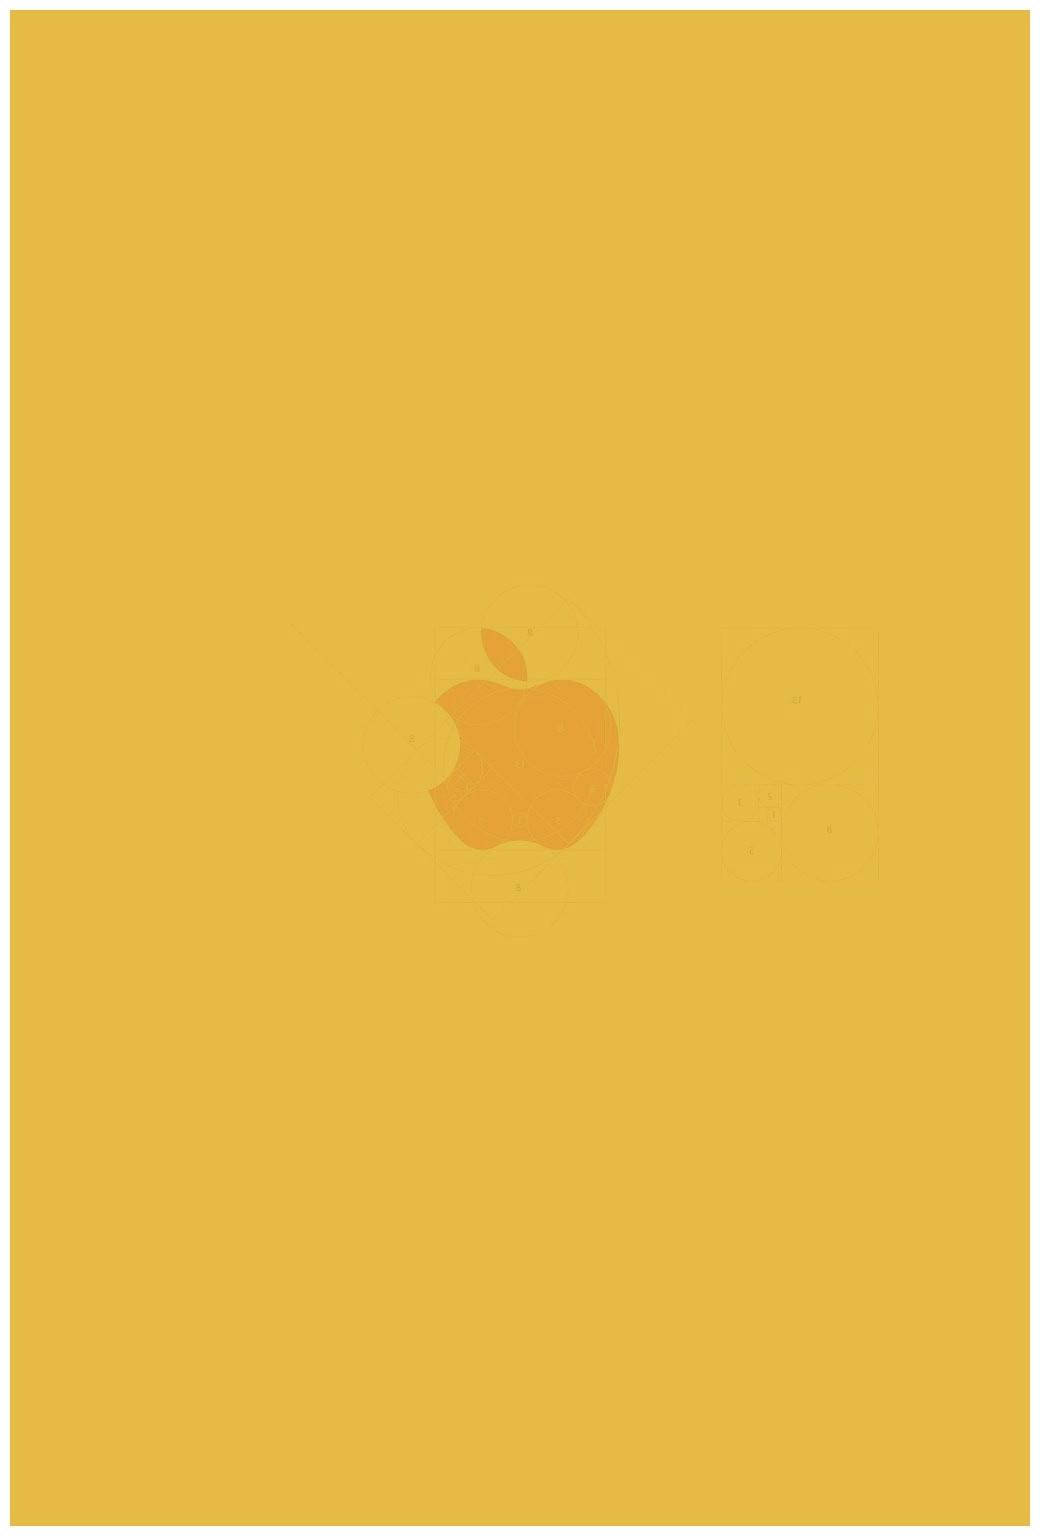 Yellow Vintage Aesthetic Background Wallpaper